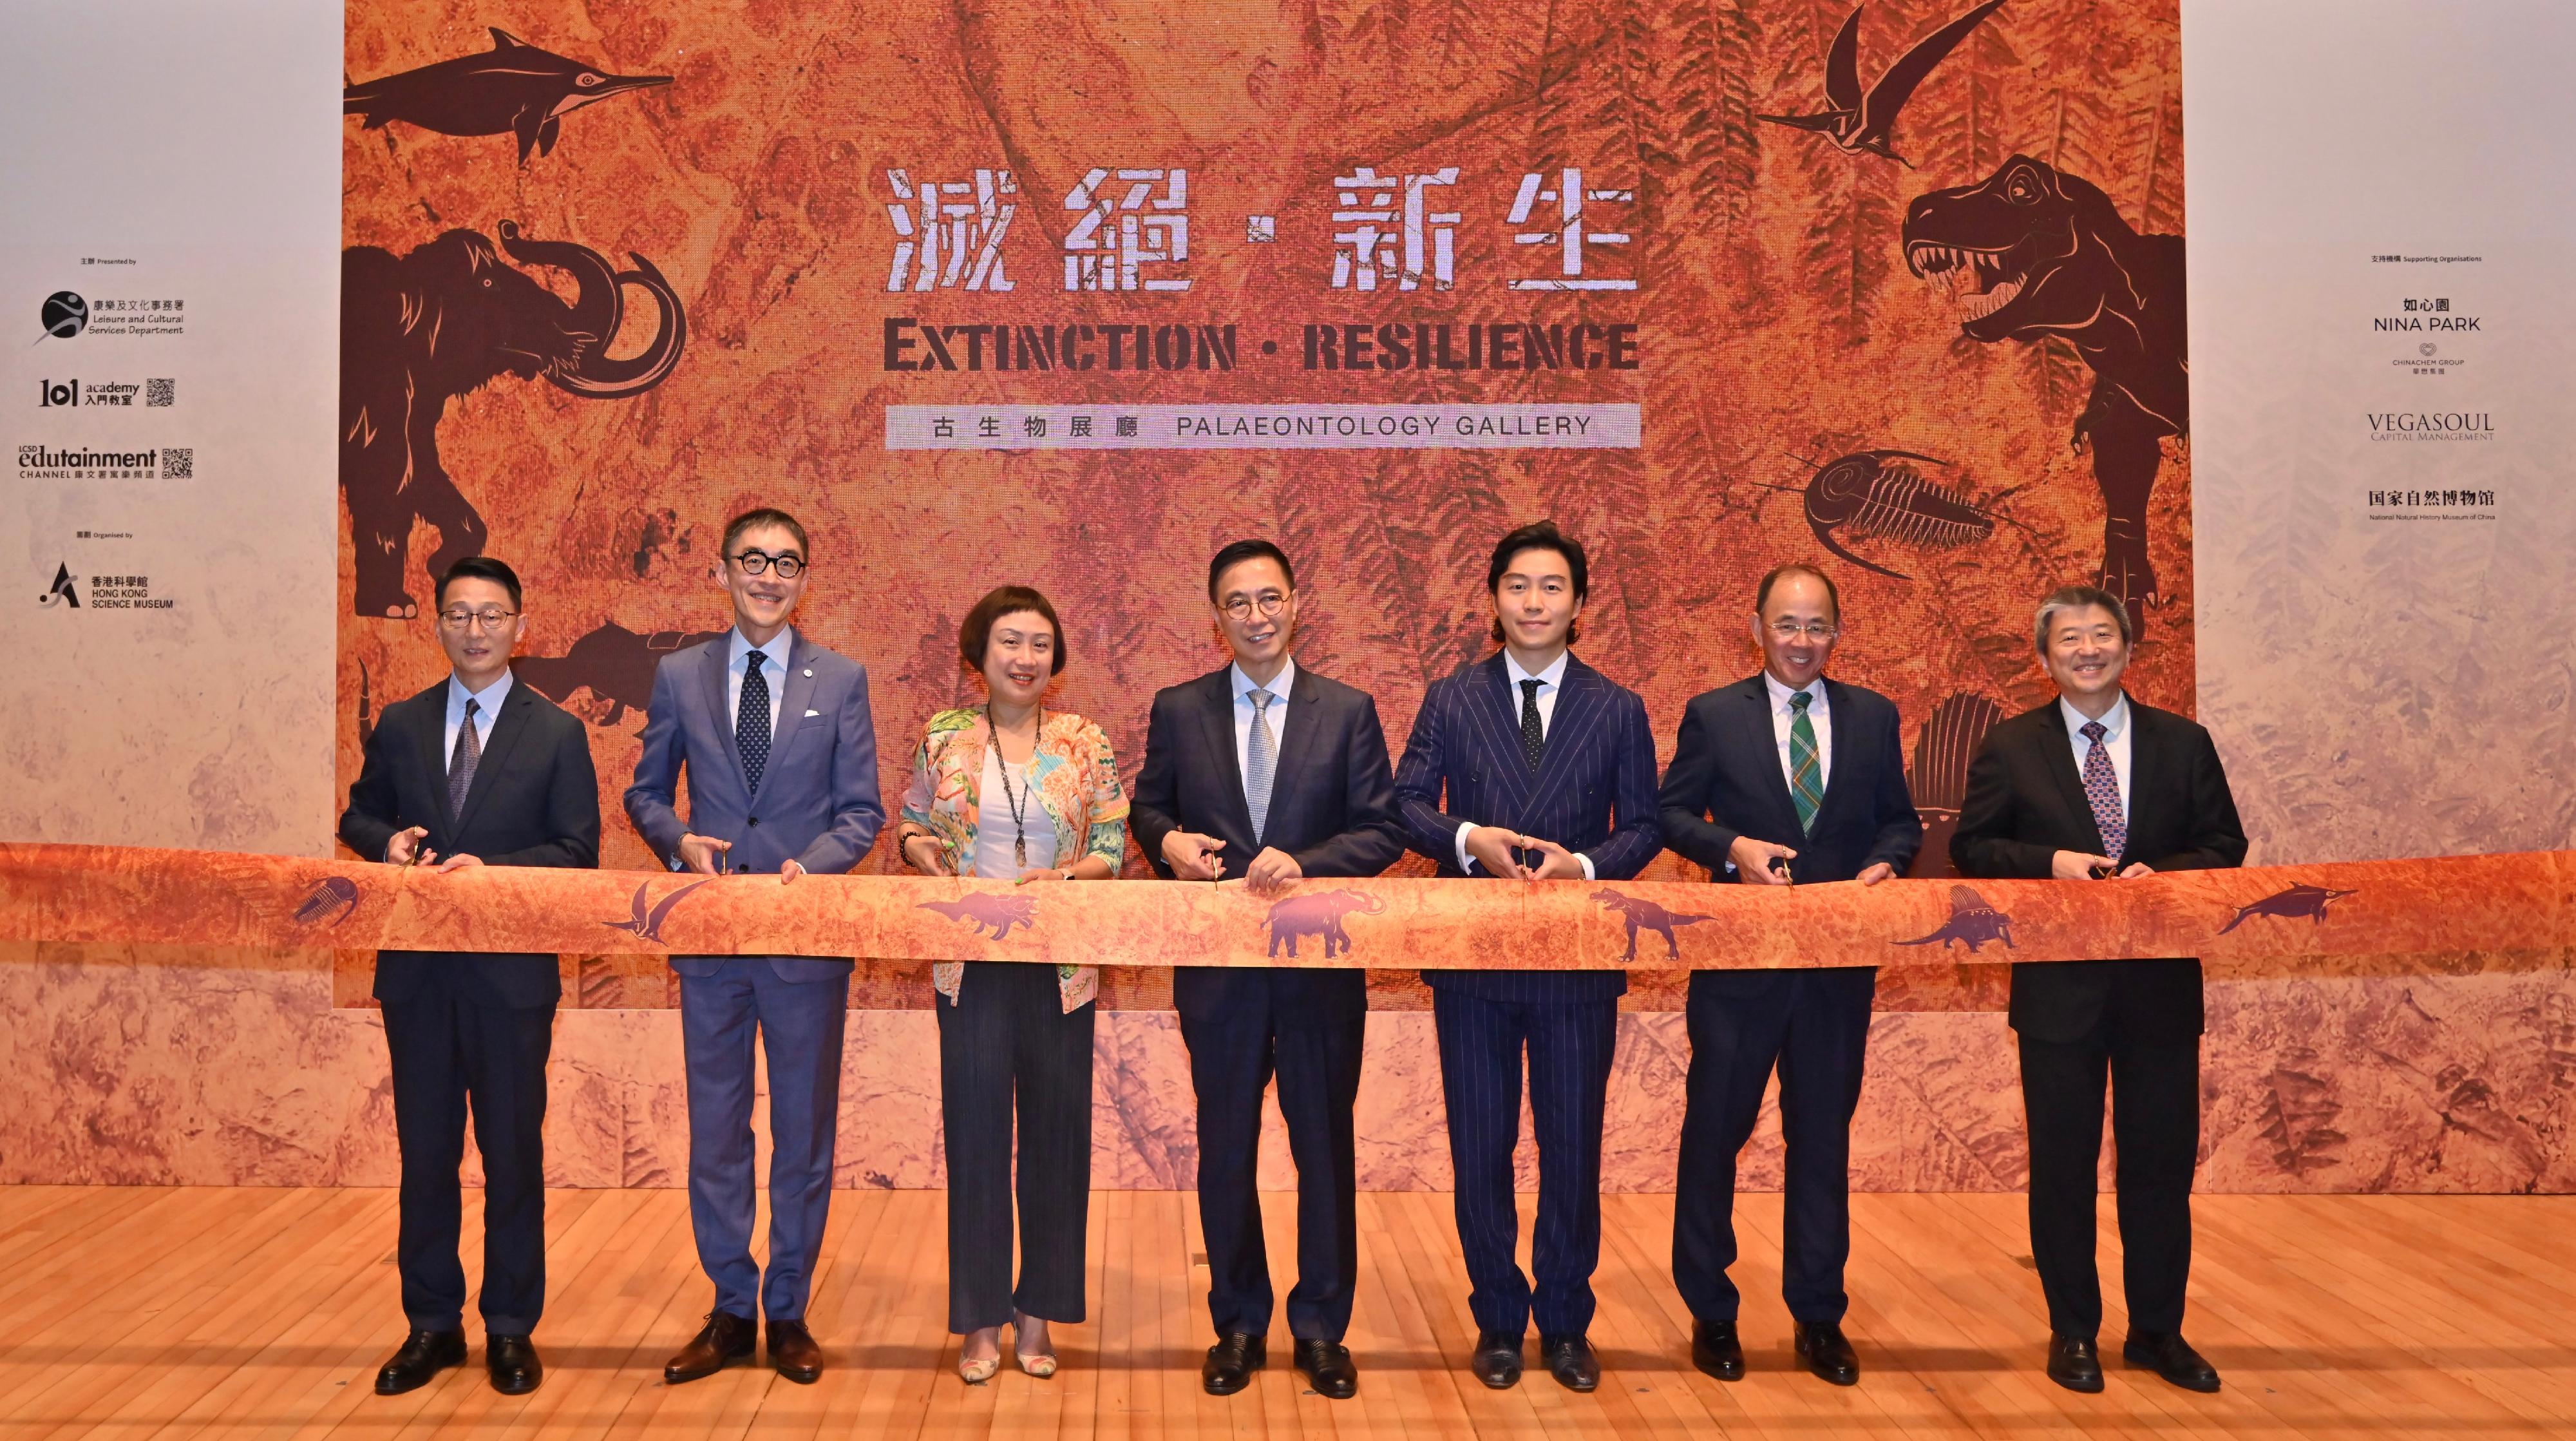 The opening ceremony for the "Extinction·Resilience" exhibition of the Palaeontology Gallery of the Hong Kong Science Museum was held today (September 14) at the museum. Photo shows (from left) the Director of Leisure and Cultural Services, Mr Vincent Liu; the Chairman of the Museum Advisory Committee, Professor Douglas So; the Chief Business Impact Officer of Chinachem Group, Ms Sylvia Chung; the Secretary for Culture, Sports and Tourism, Mr Kevin Yeung; the Director of Vegasoul Capital Management (Asia) Limited, Dr Run Run Wong; Museum Expert Adviser of the Hong Kong Science Museum Professor Chan Lung-sang; and the Museum Director of the Hong Kong Science Museum, Mr Lawrence Lee, officiating at the ceremony.